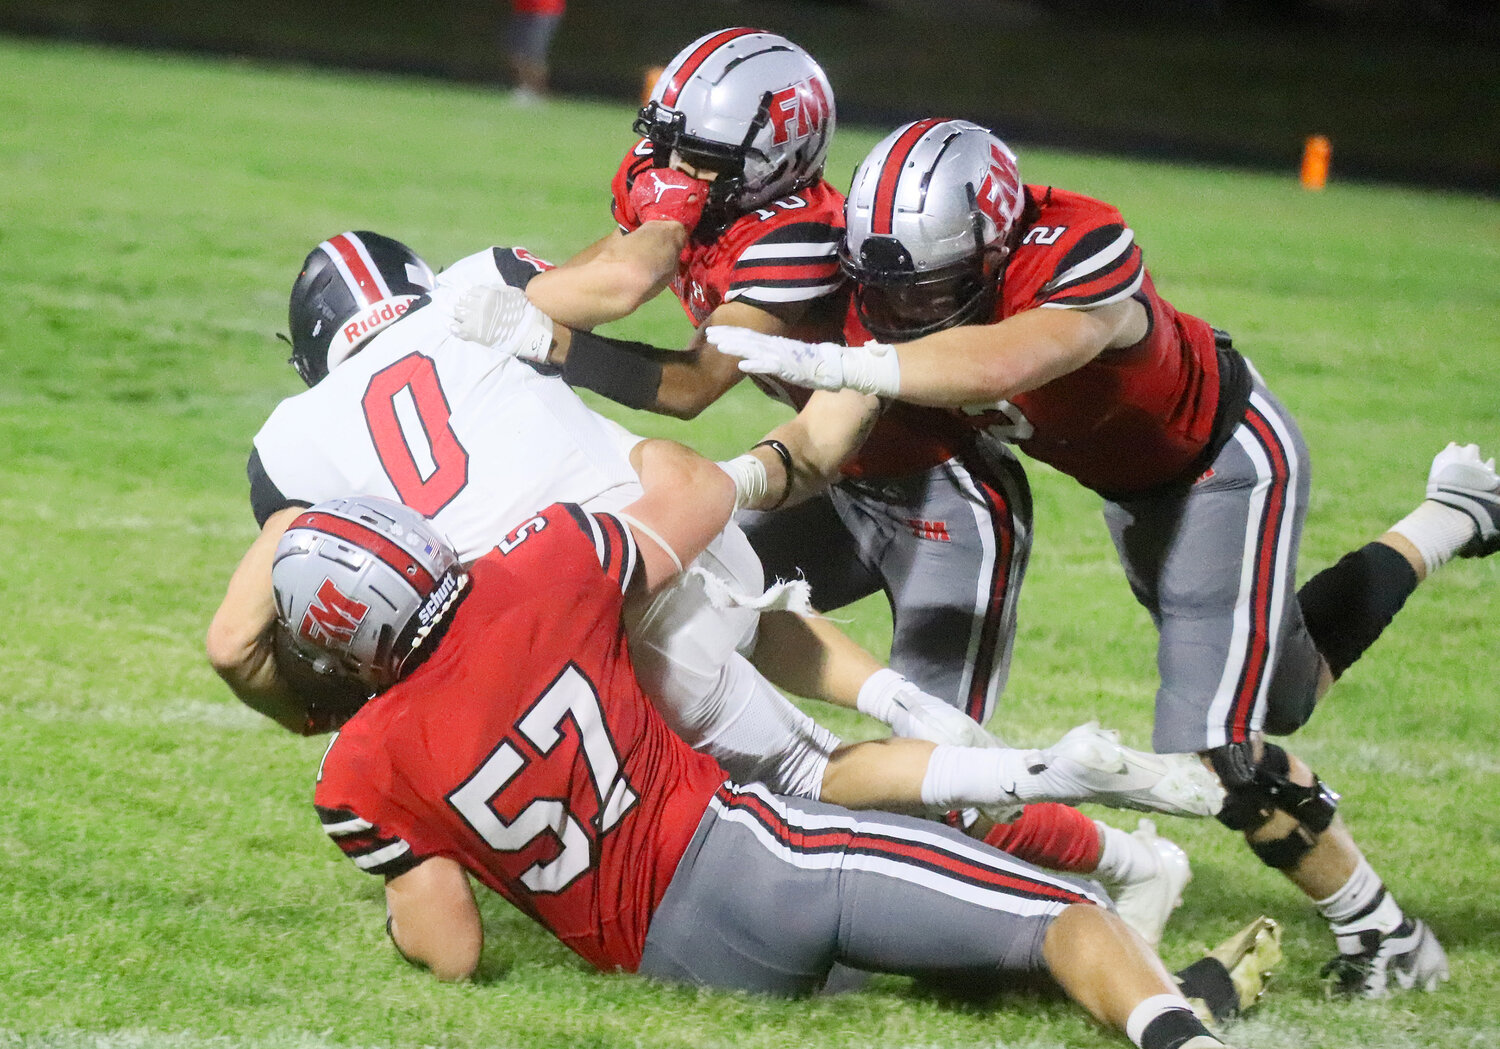 Fort Madison's Tristan Marshall and Teague Smith bring down Williamsburg's Braylon Wetjen in the first quarter of the Hounds' 48-14 loss to the Raiders in Fort Madison.